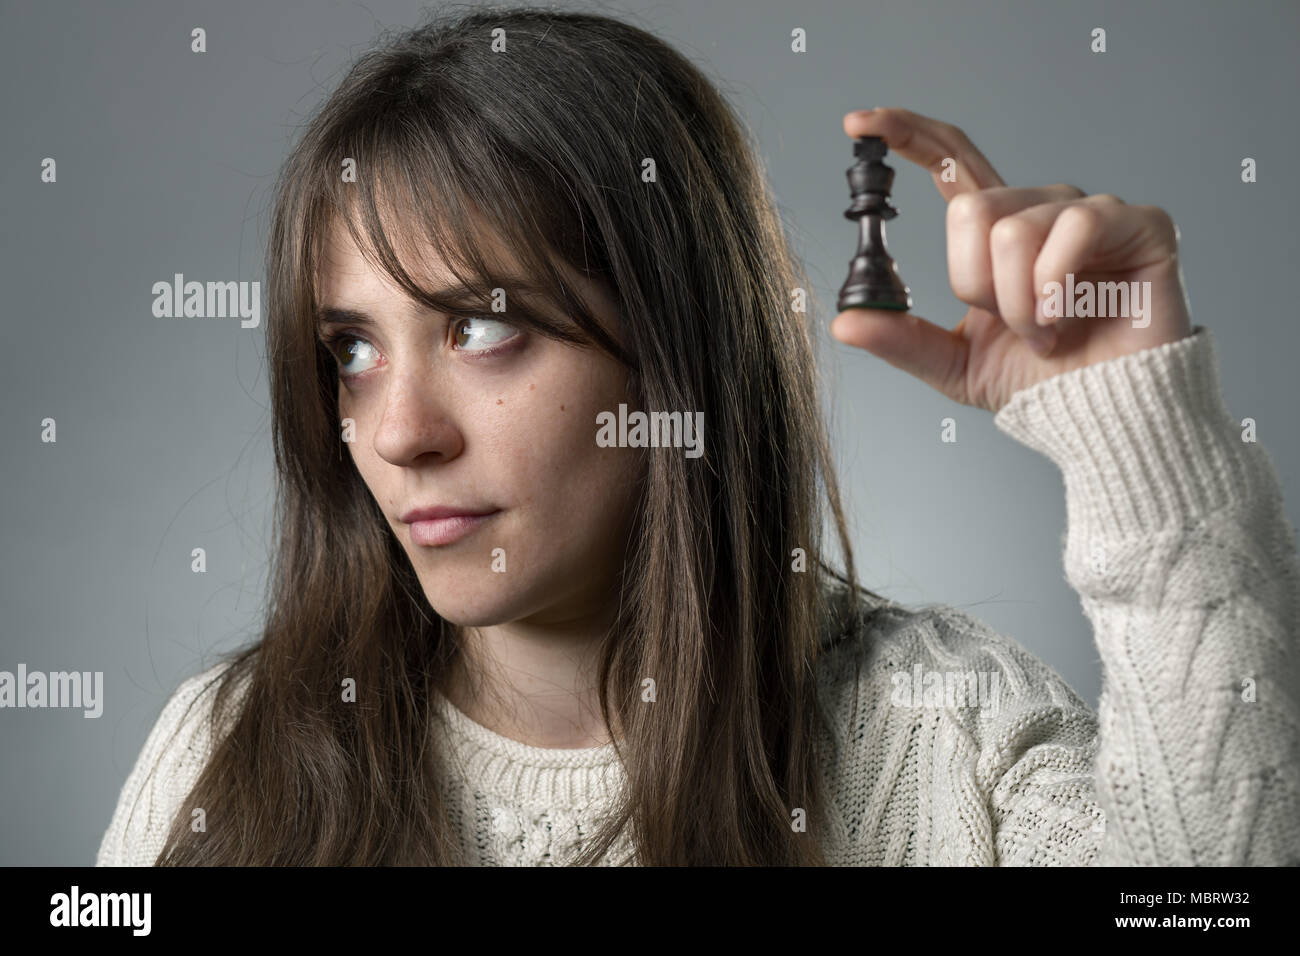 Bored Woman Holding a King Chess Piece with Her Hand Stock Photo